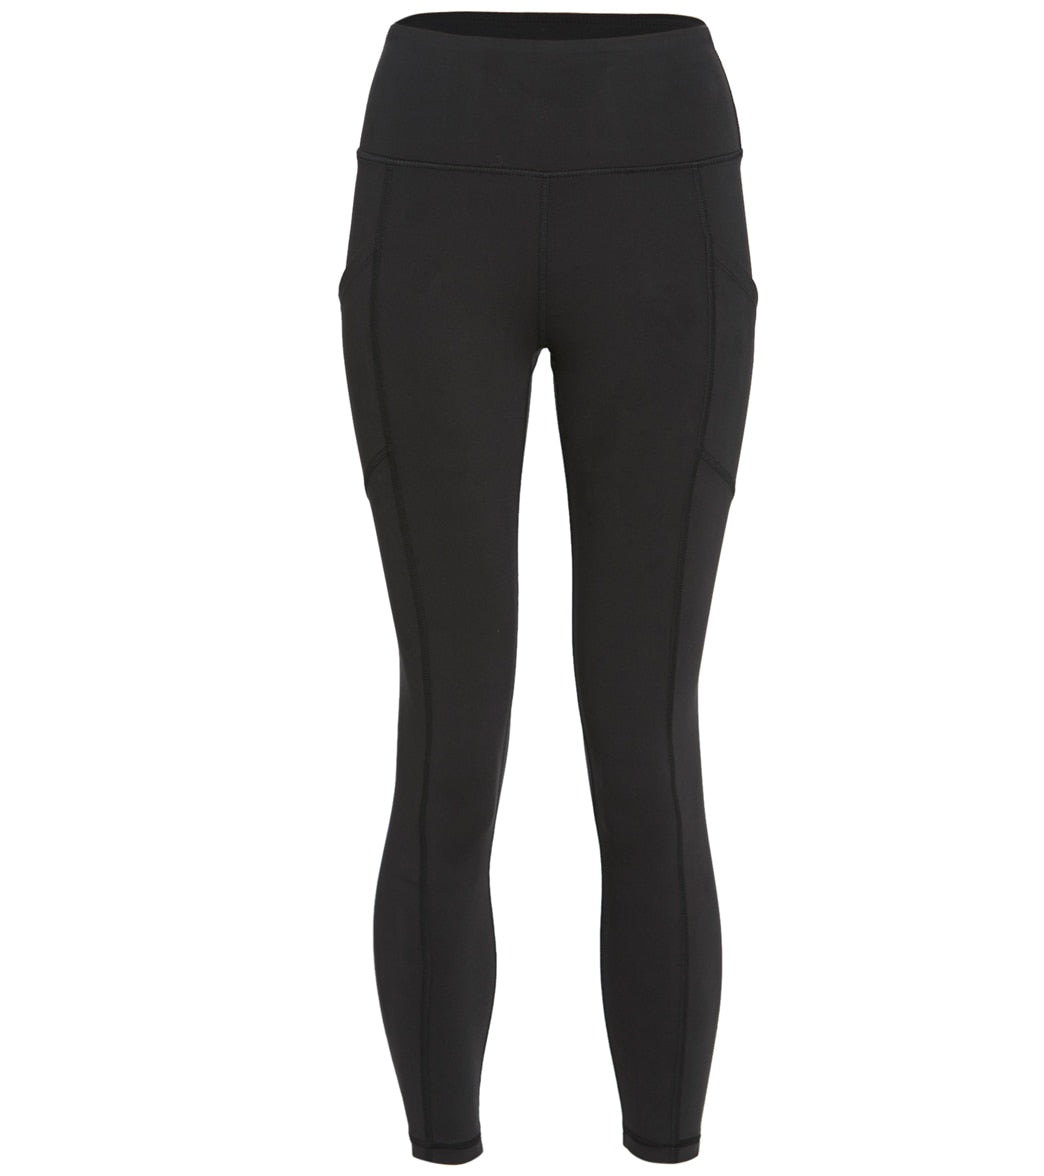 BALLY TOTAL FITNESS / MARIKA / BALANCE Balance Collection HARLEY HW - 3/4  Leggings - Women's - white contour f - Private Sport Shop